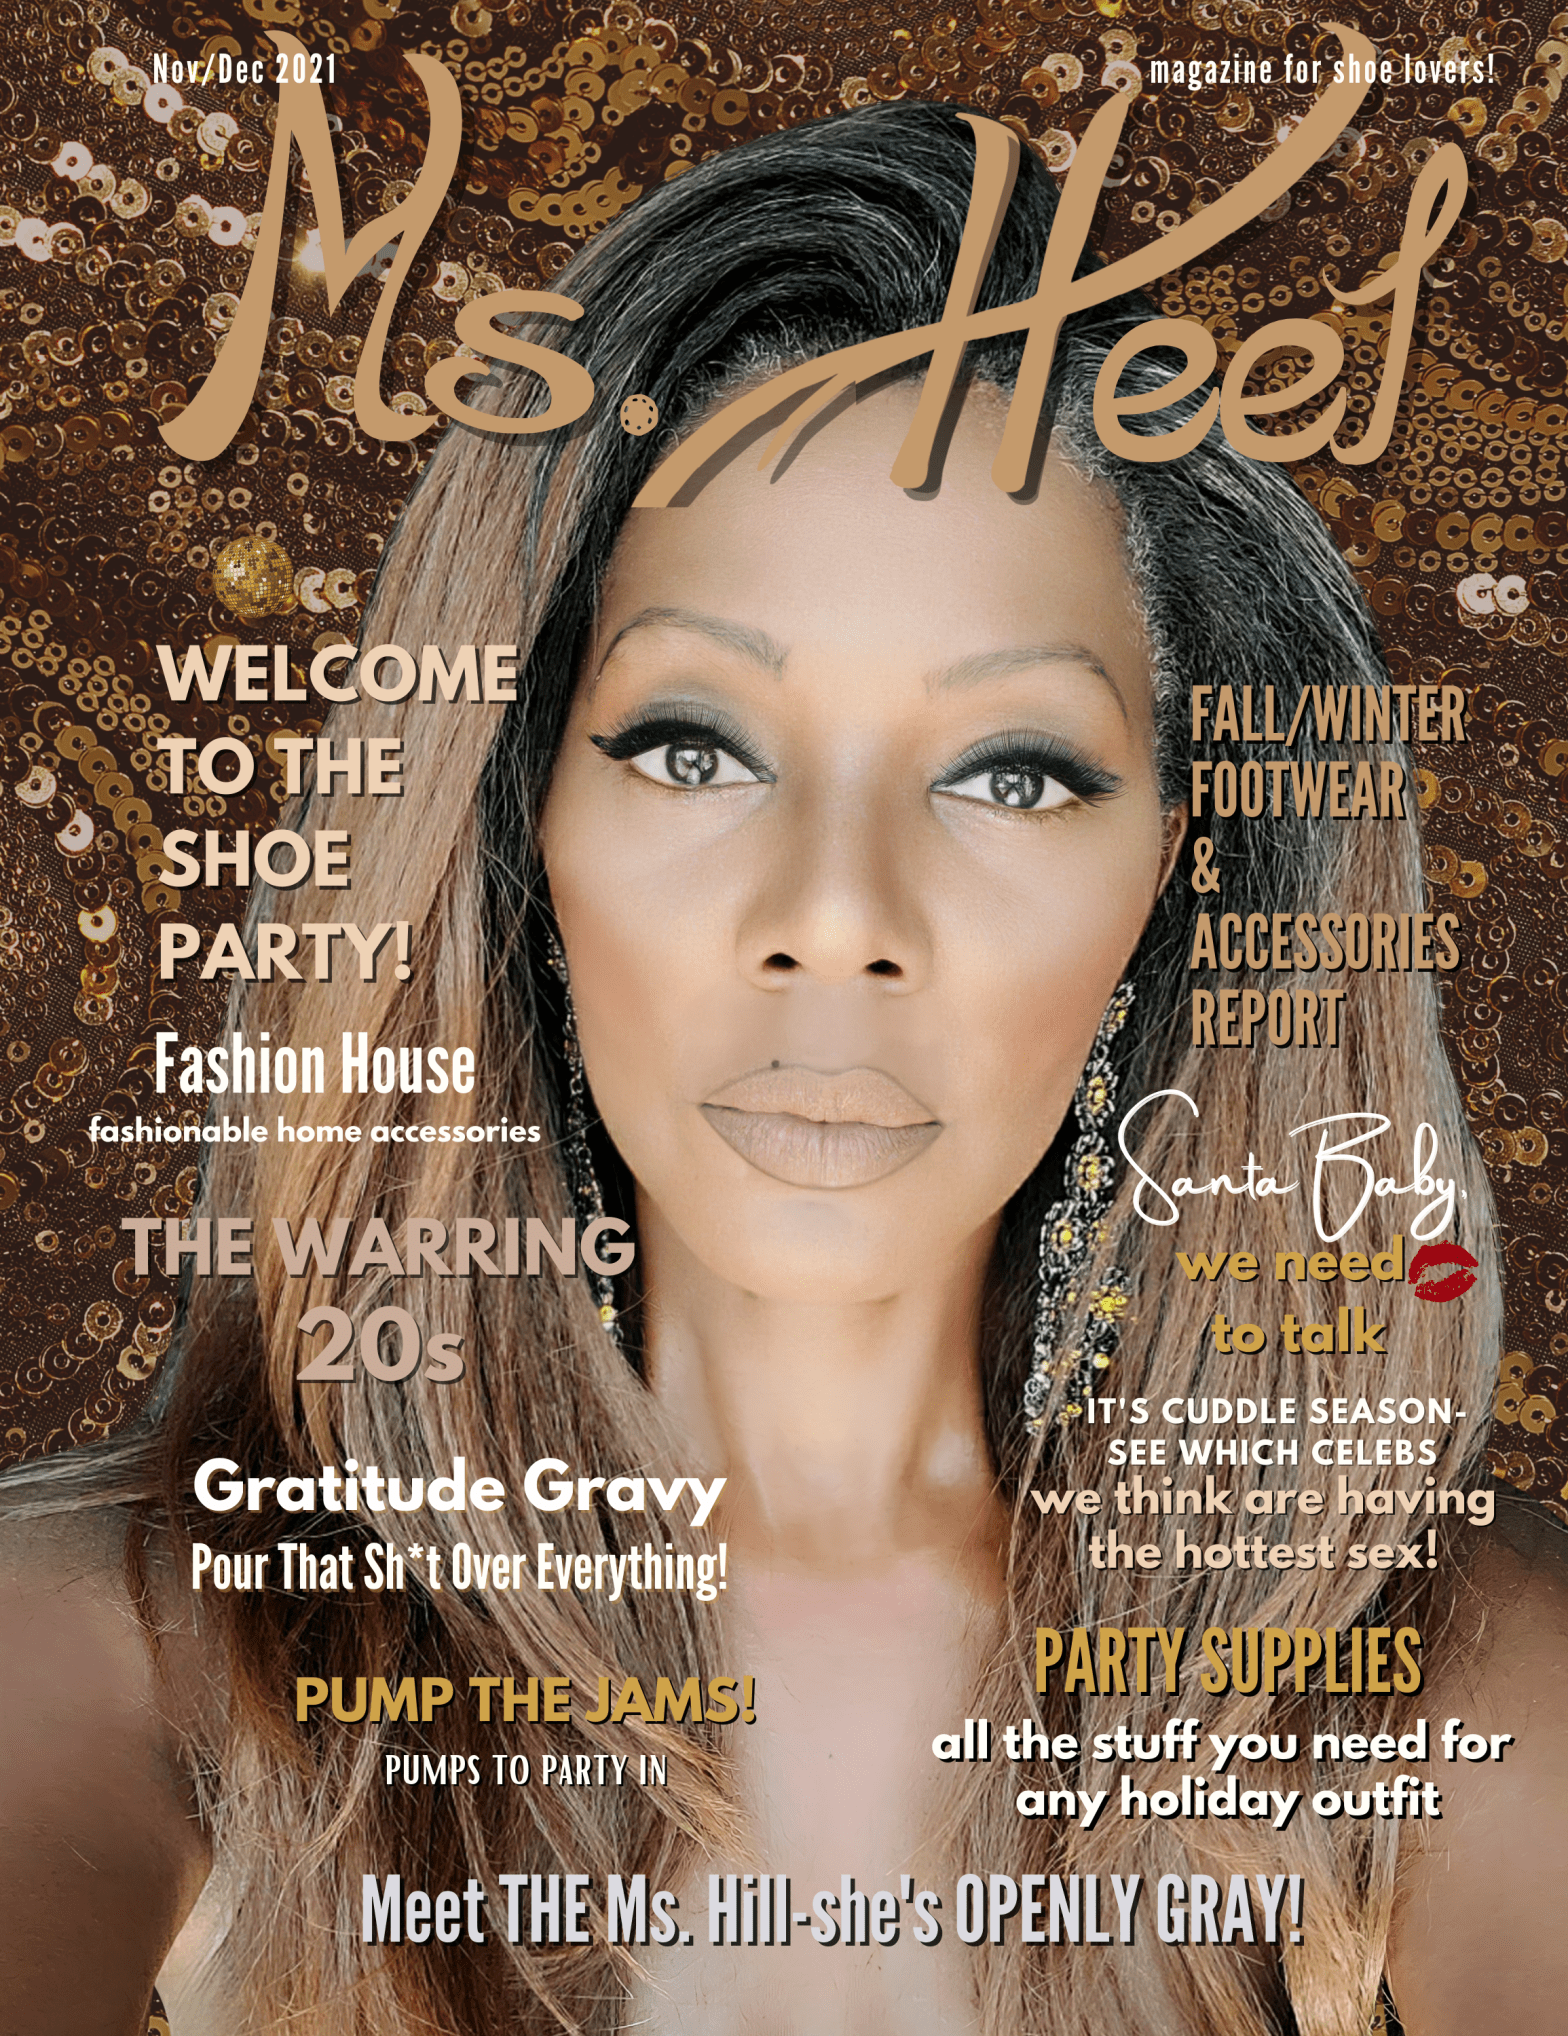 Our 1st National Magazine is Here